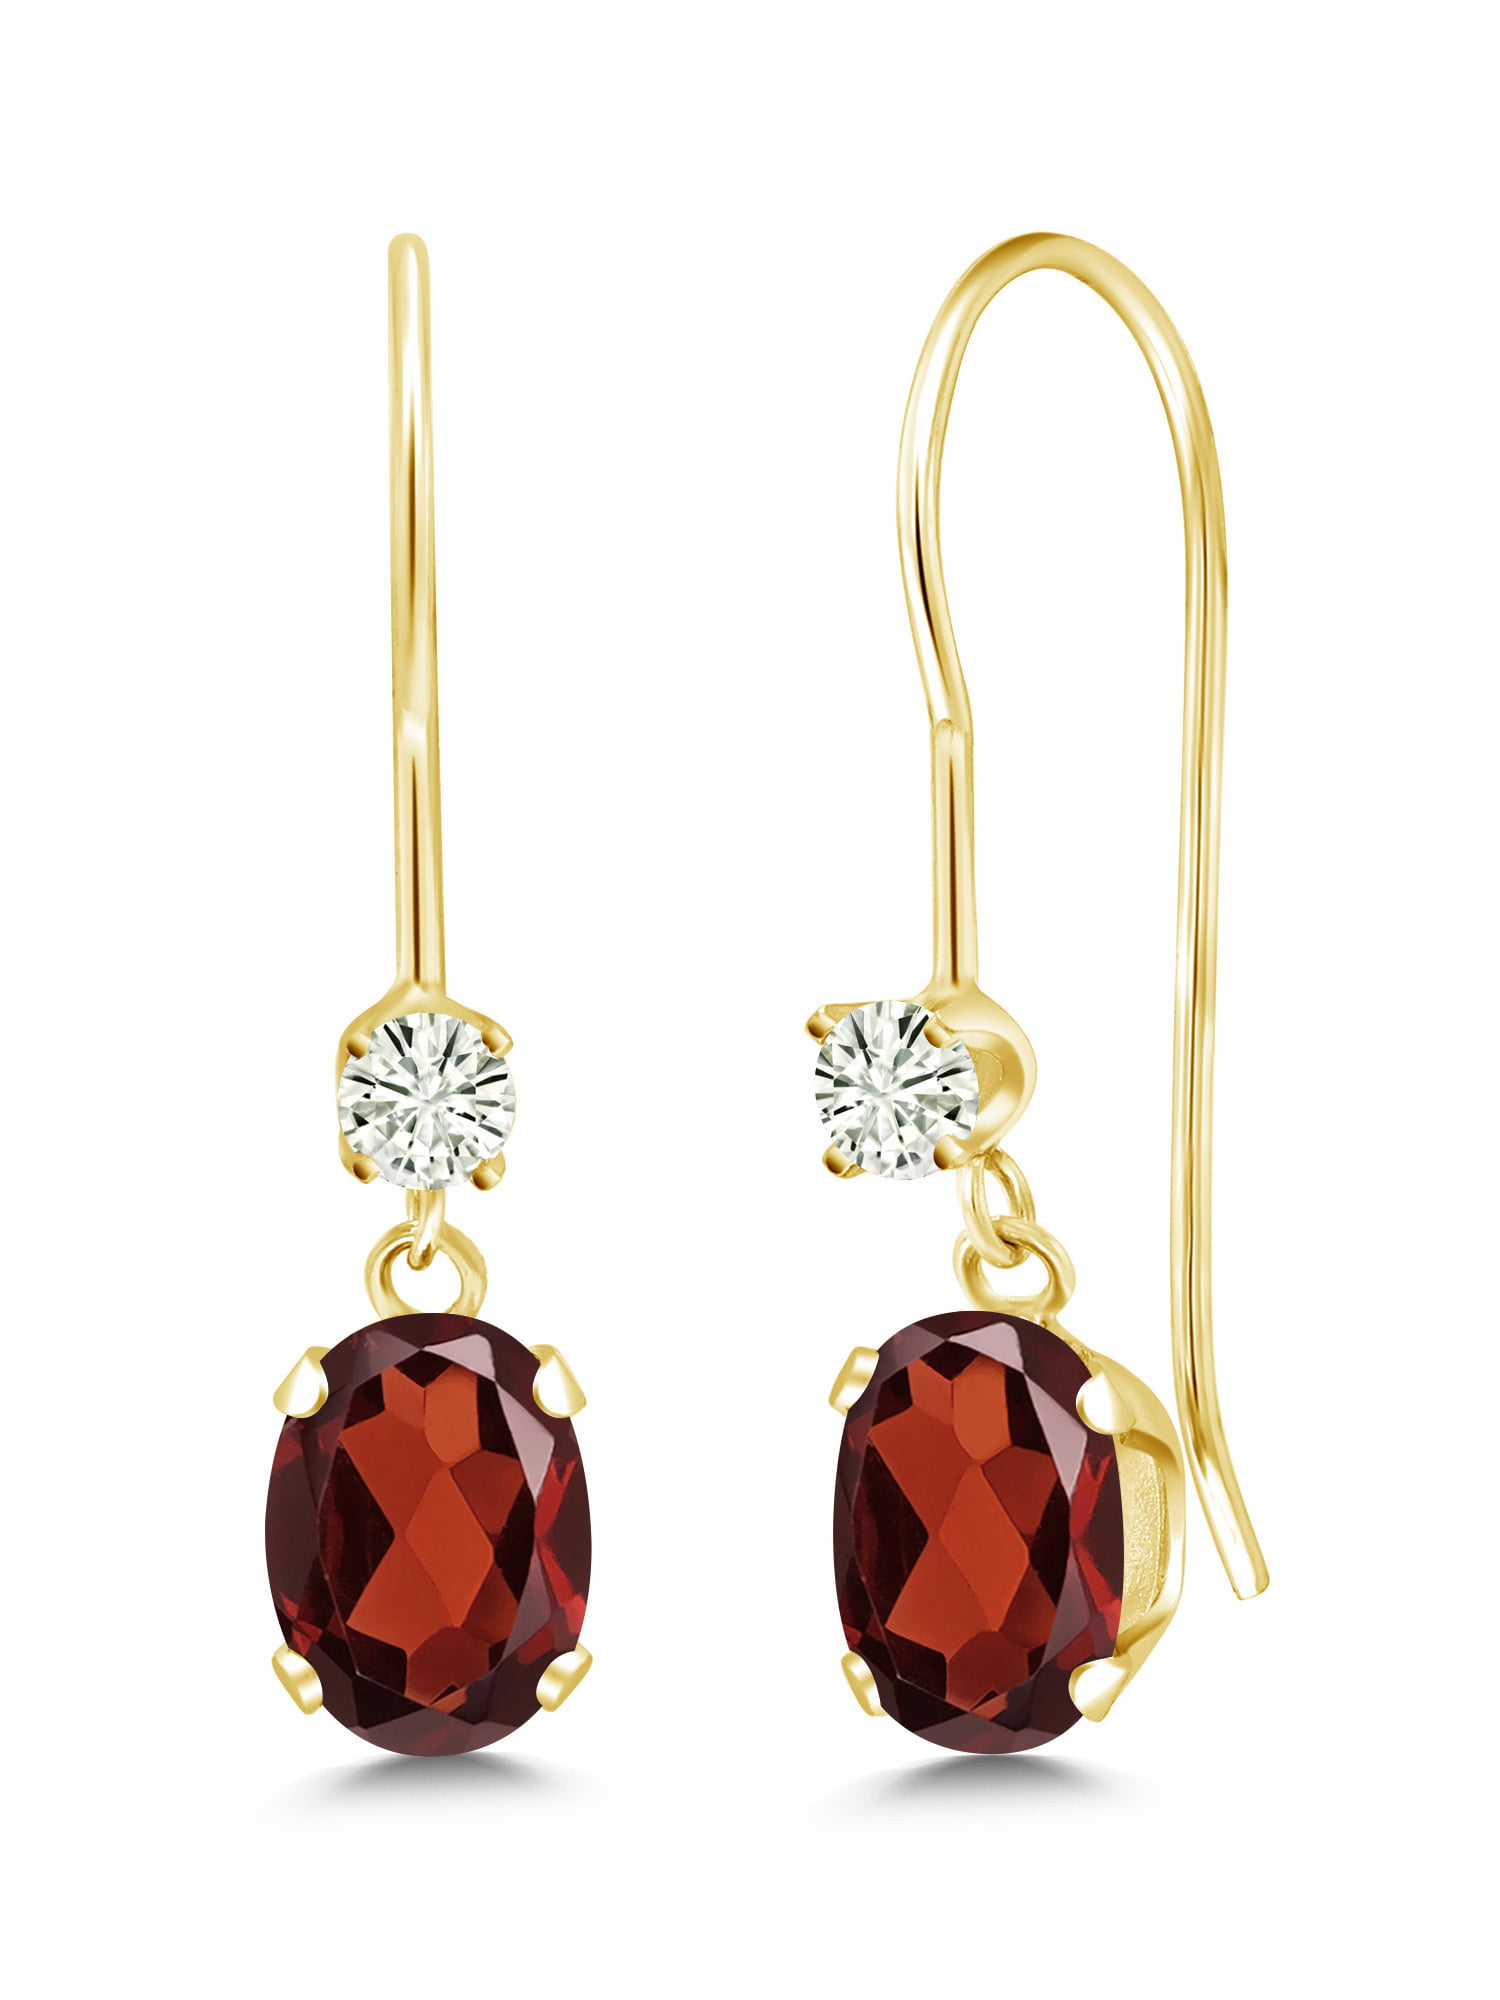 2 Ct Oval & Round Red Garnet Drop/Dangle Earrings 14k Yellow Gold Over